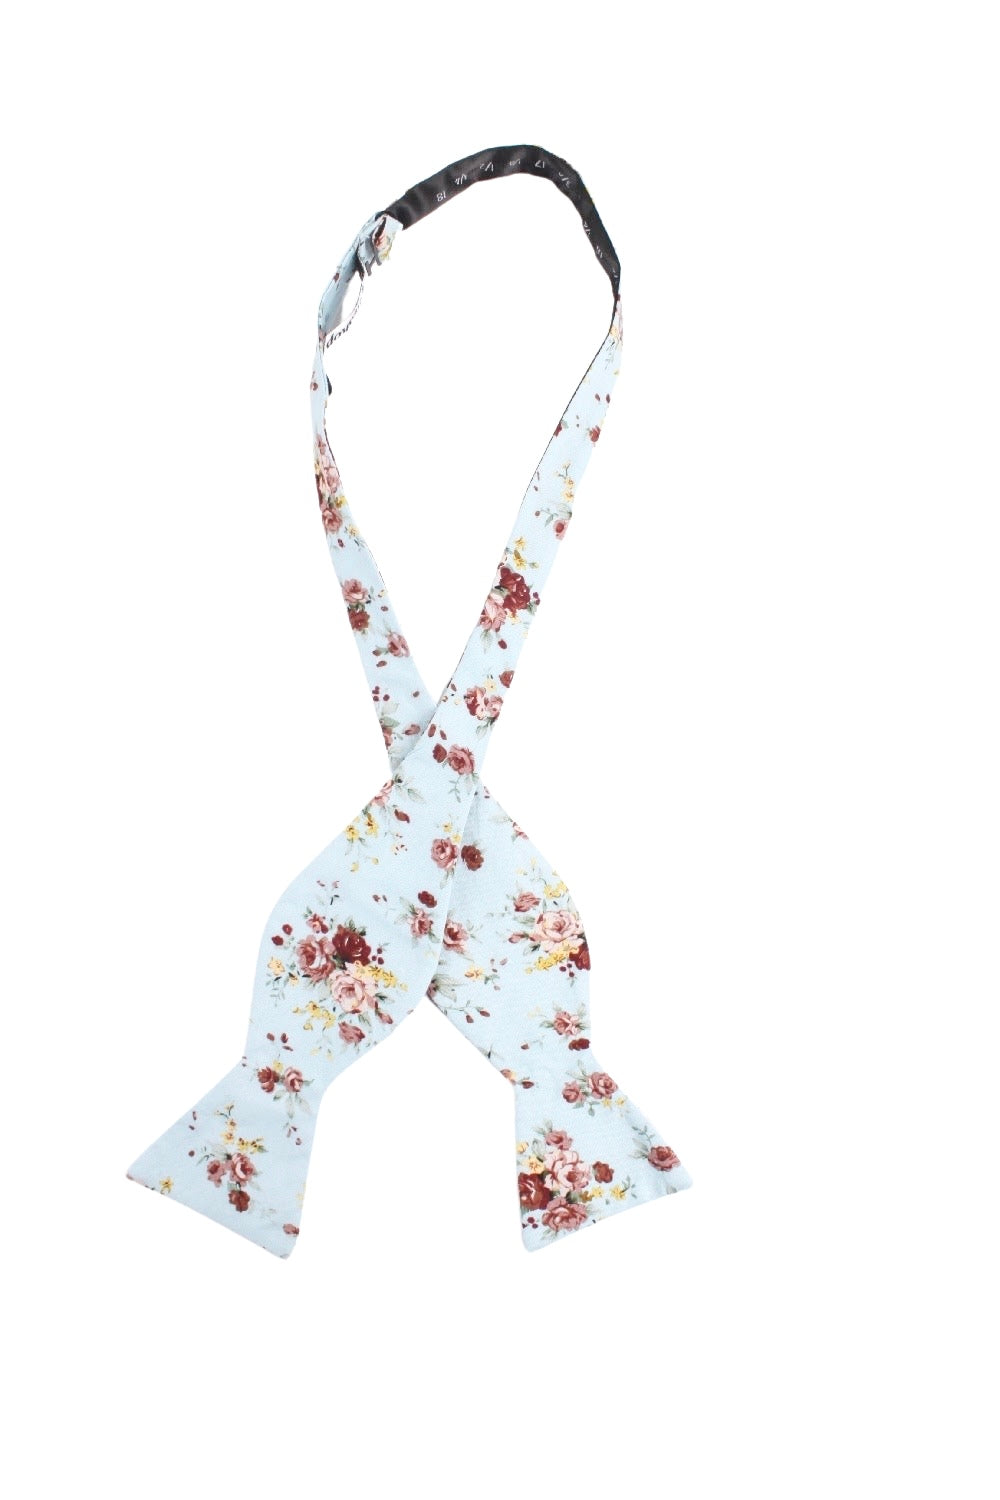 Light Blue Floral Self Tie Bow Tie SEAN-Light Blue Floral Self Tie Bow Tie 100% Cotton Flannel Handmade Adjustable to fit most neck sizes 13 3/4&quot; - 18&quot; Great for: Weddings Events Anniversaries Parties-Mytieshop